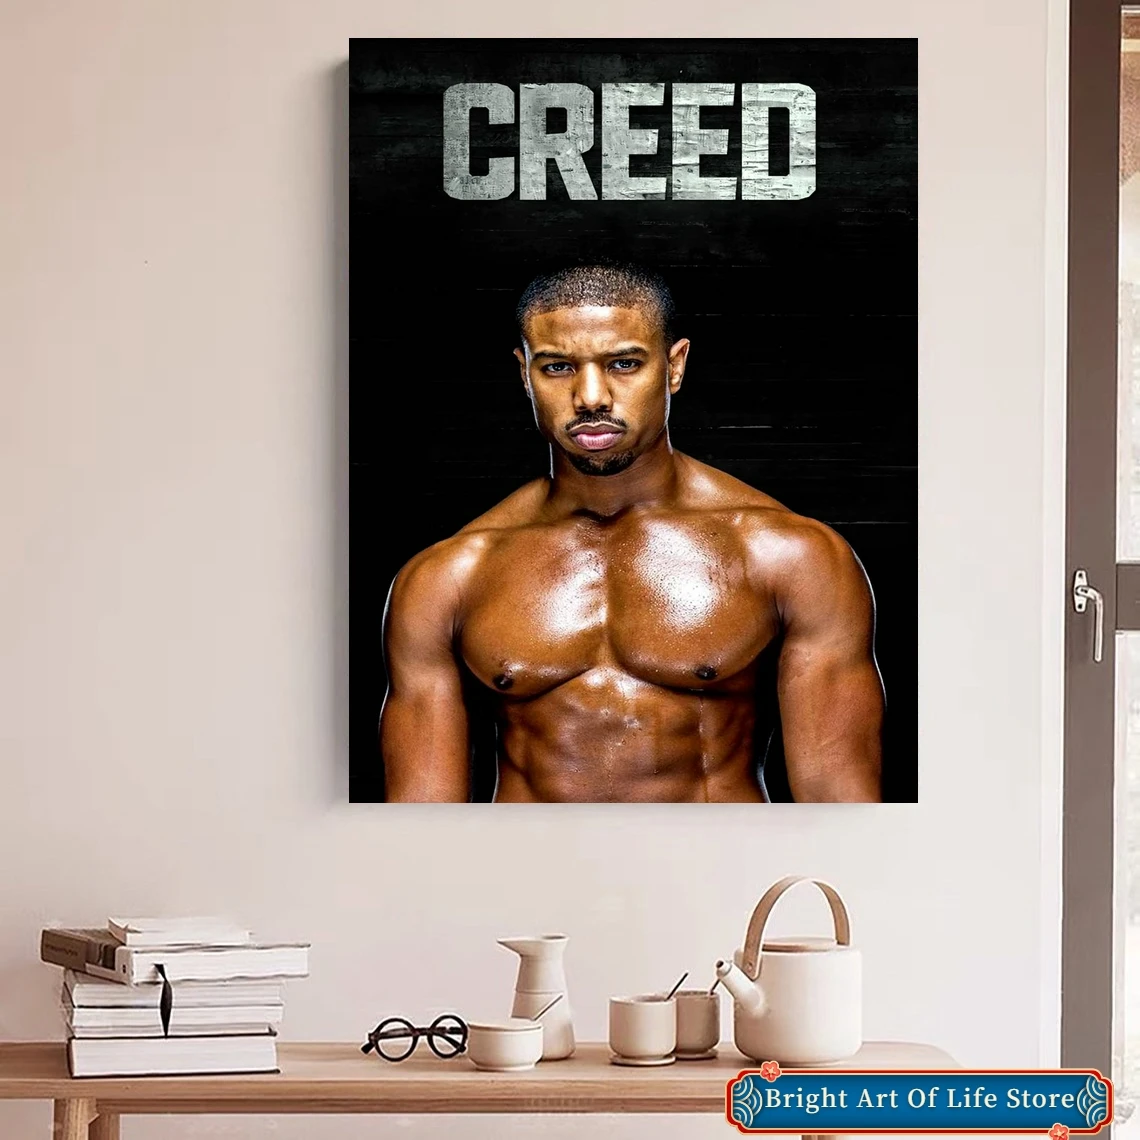 

Creed Movie Poster Art Cover Star Photo Print Apartment Home Decor Wall Painting (No Frame)